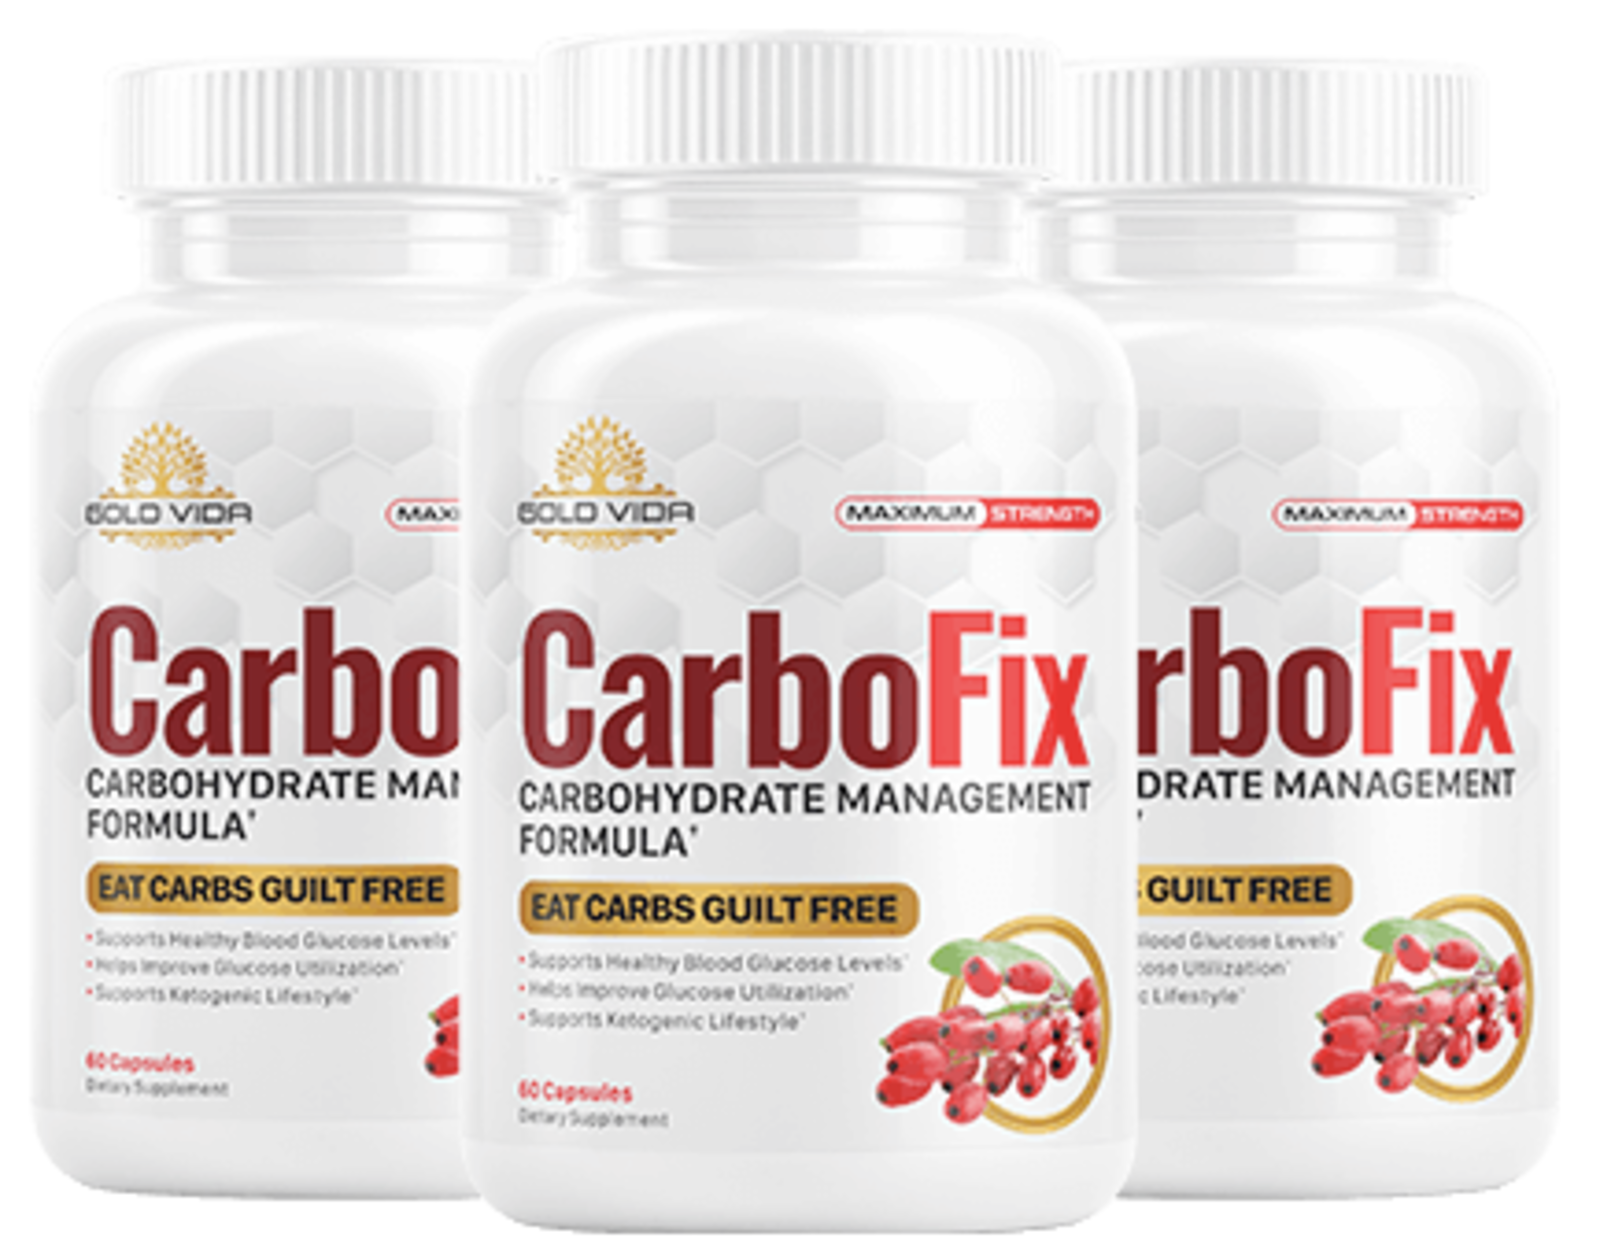 Carbofix Supplement Reviews: Is Carbofix Safe? By MJ Customer Reviews